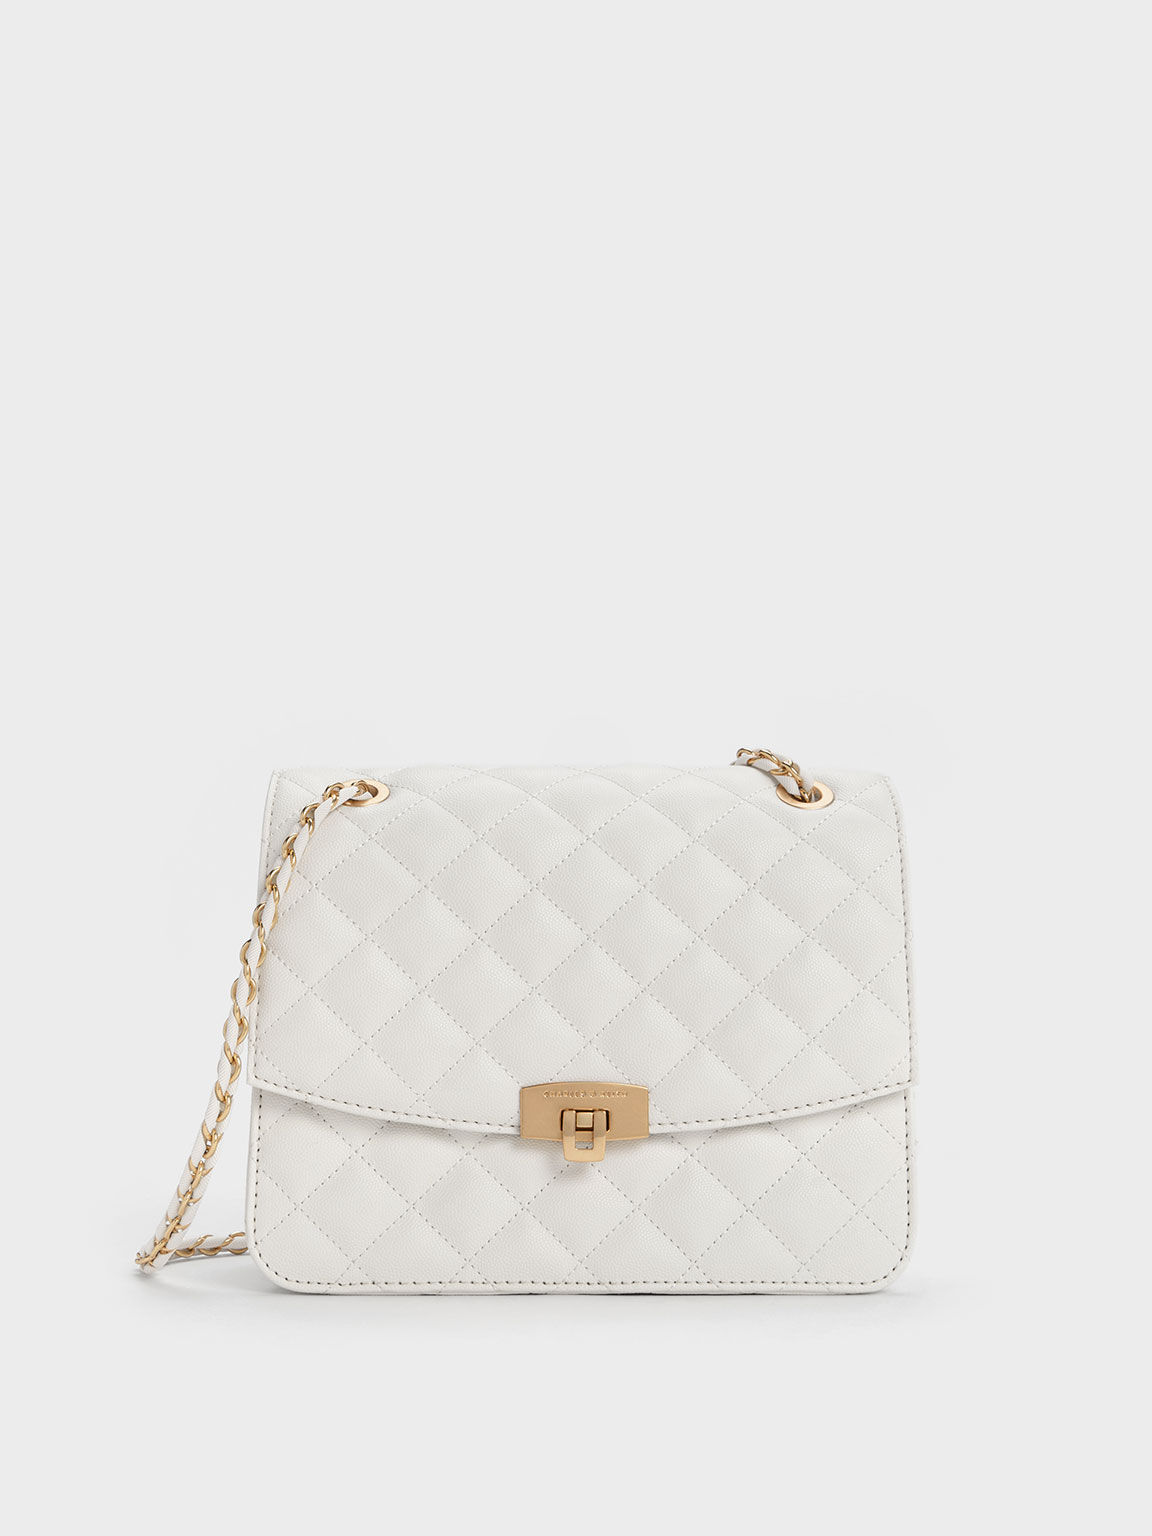 White Leather-Look Quilted Chain Strap Cross Body Bag | New Look